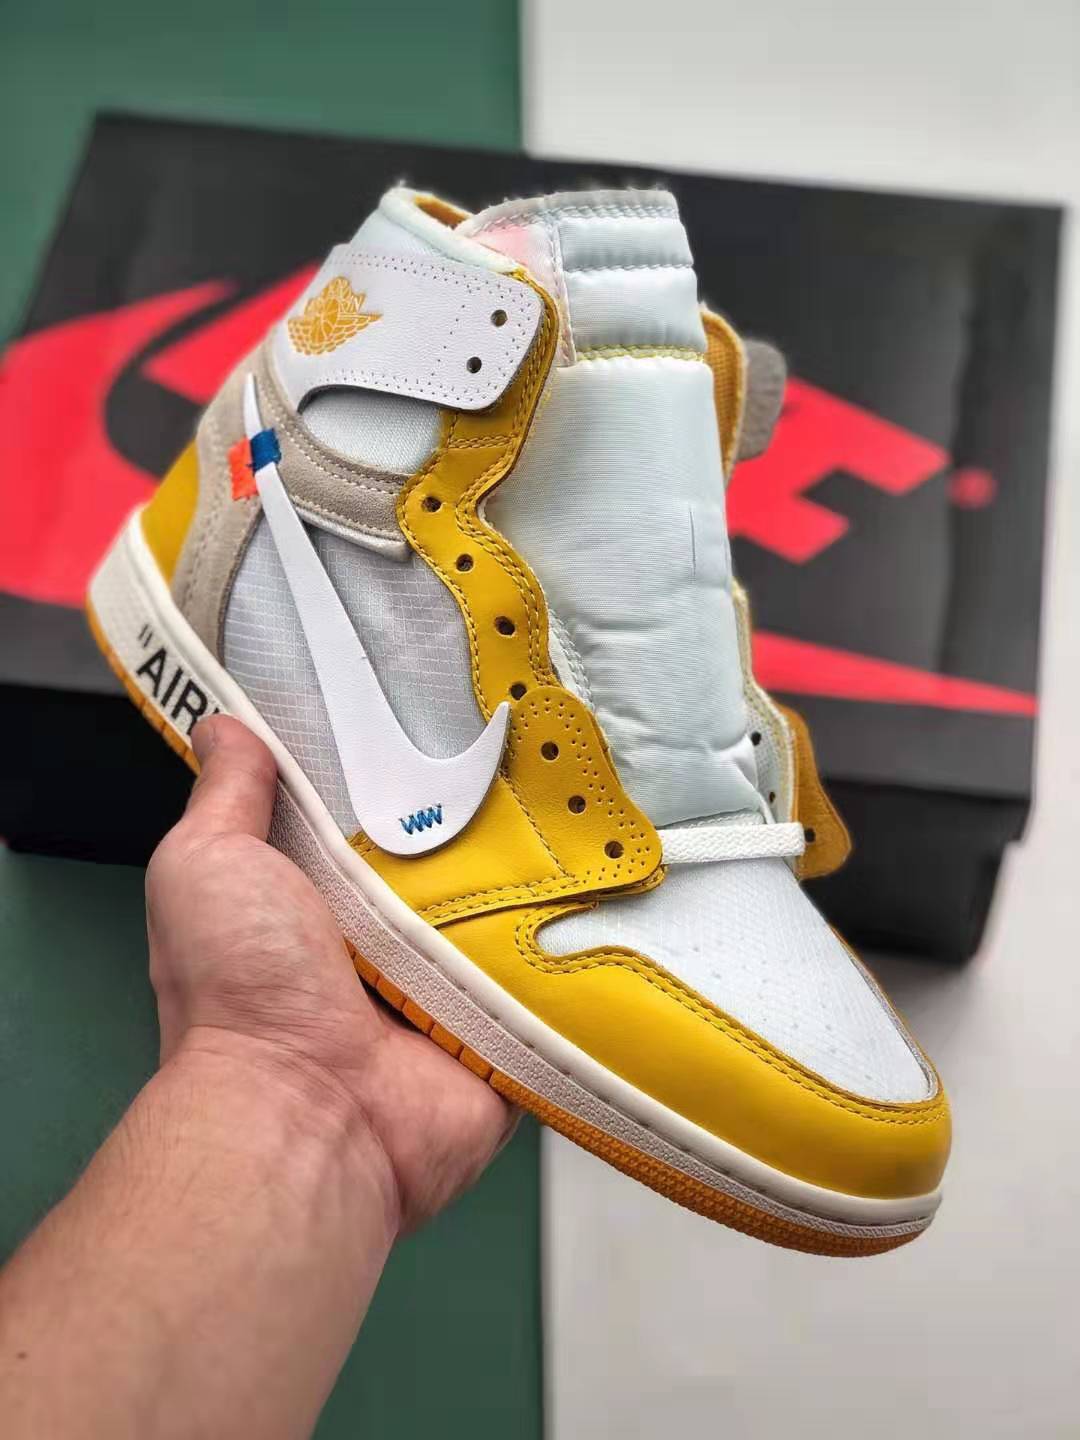 Jordan 1 Retro High Off-White Canary Yellow AQ0818-149 - Limited Edition Must-Have Sneakers